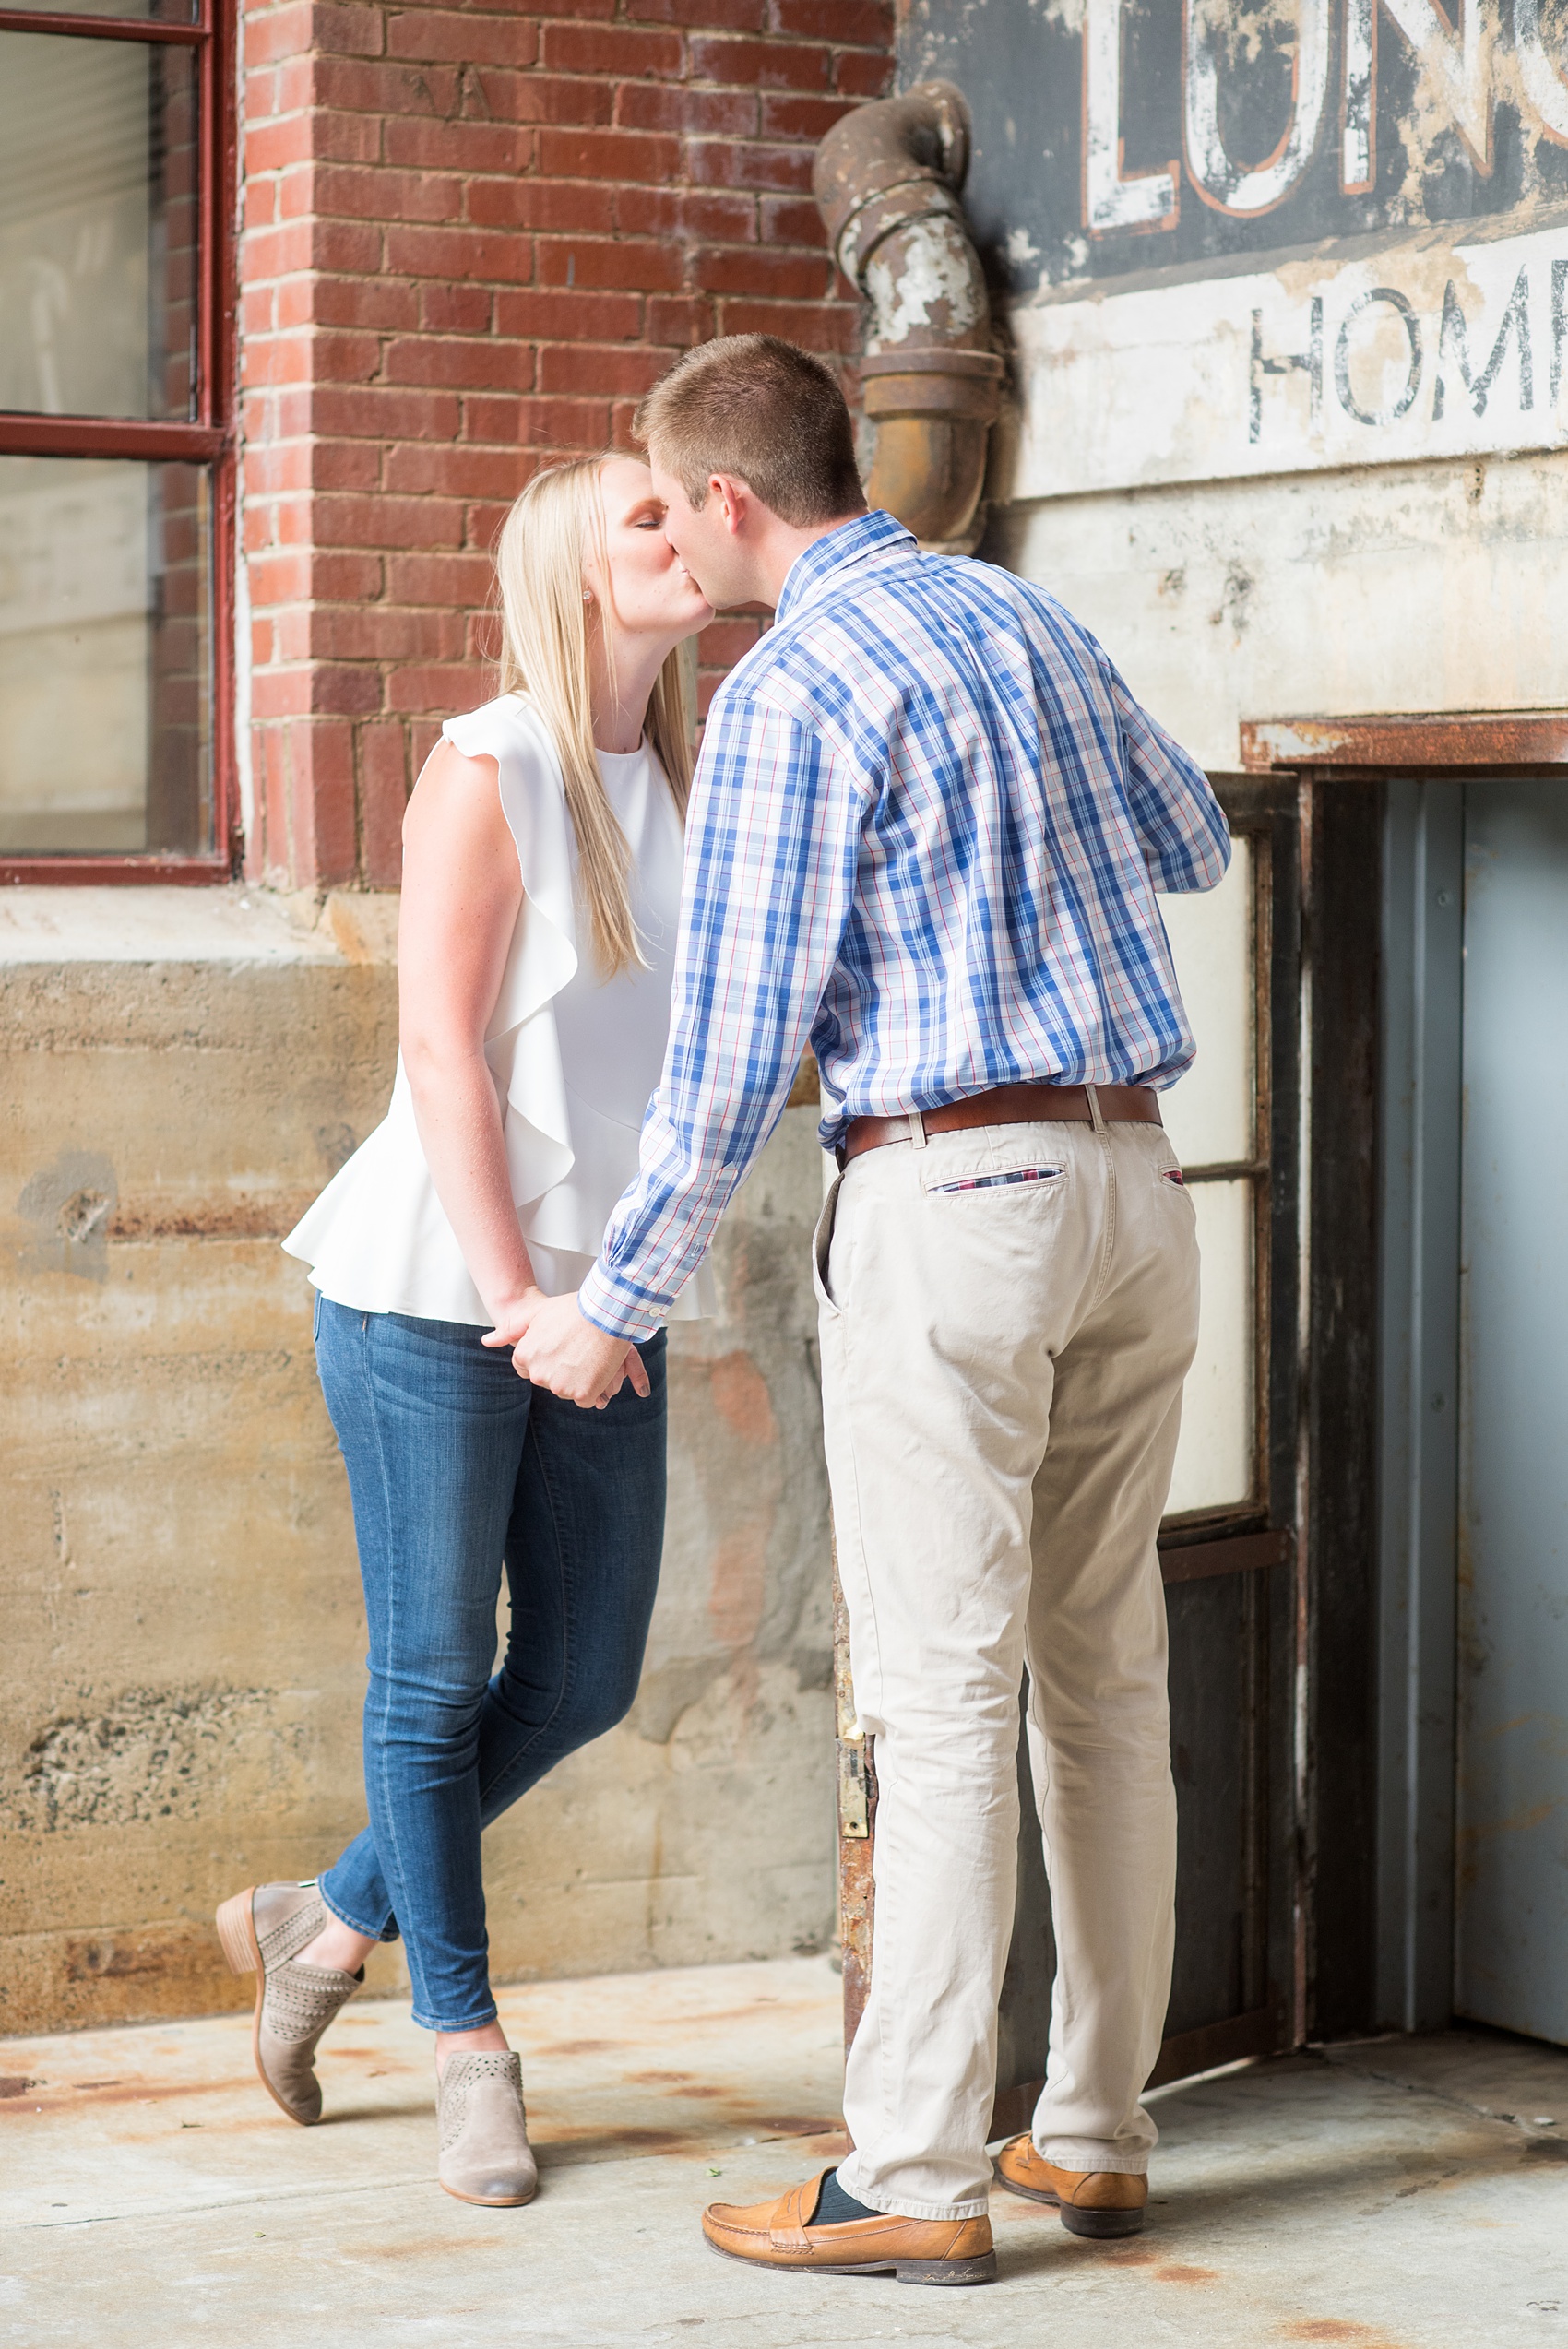 Mikkel Paige Photography photos from an engagement session at Durham's American Tobacco Campus in North Carolina. Sweet photo of the couple kissing.